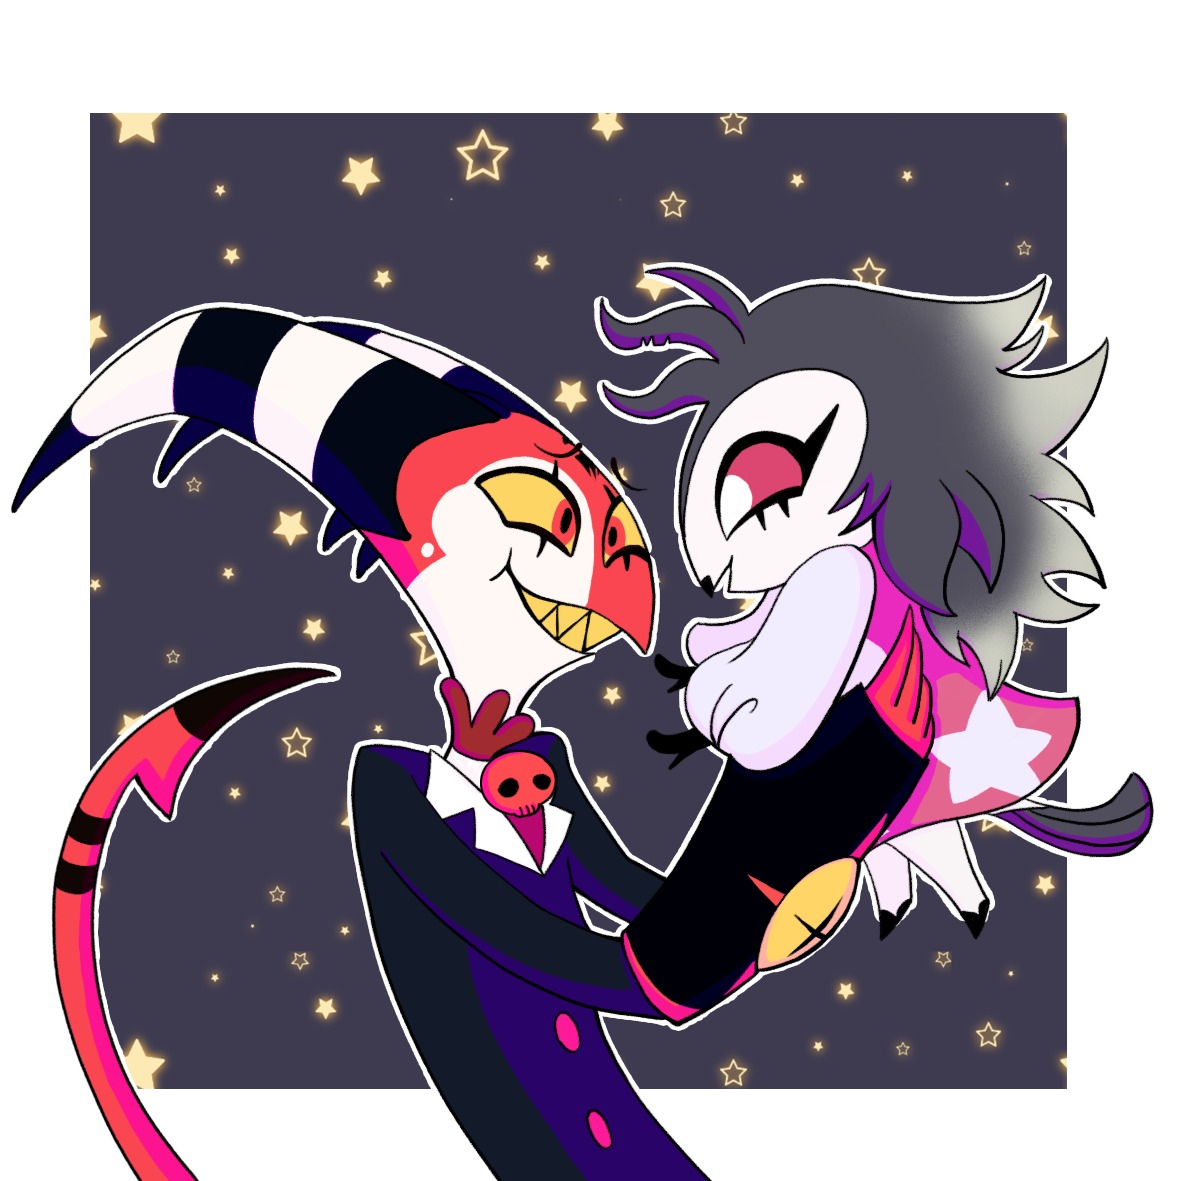 ✨Another Helluva Boss one✨

Can you imagine them meeting before?

I have like two or three more of helluva boss drawings bc I'm obsessed 🥺💕

#helluvaboss #helluvablitzo #helluvaoctavia #helluvamoxxie #helluvamillie #helluvaloona #hazbinhotel #helluvastolas #blitzo #stolas